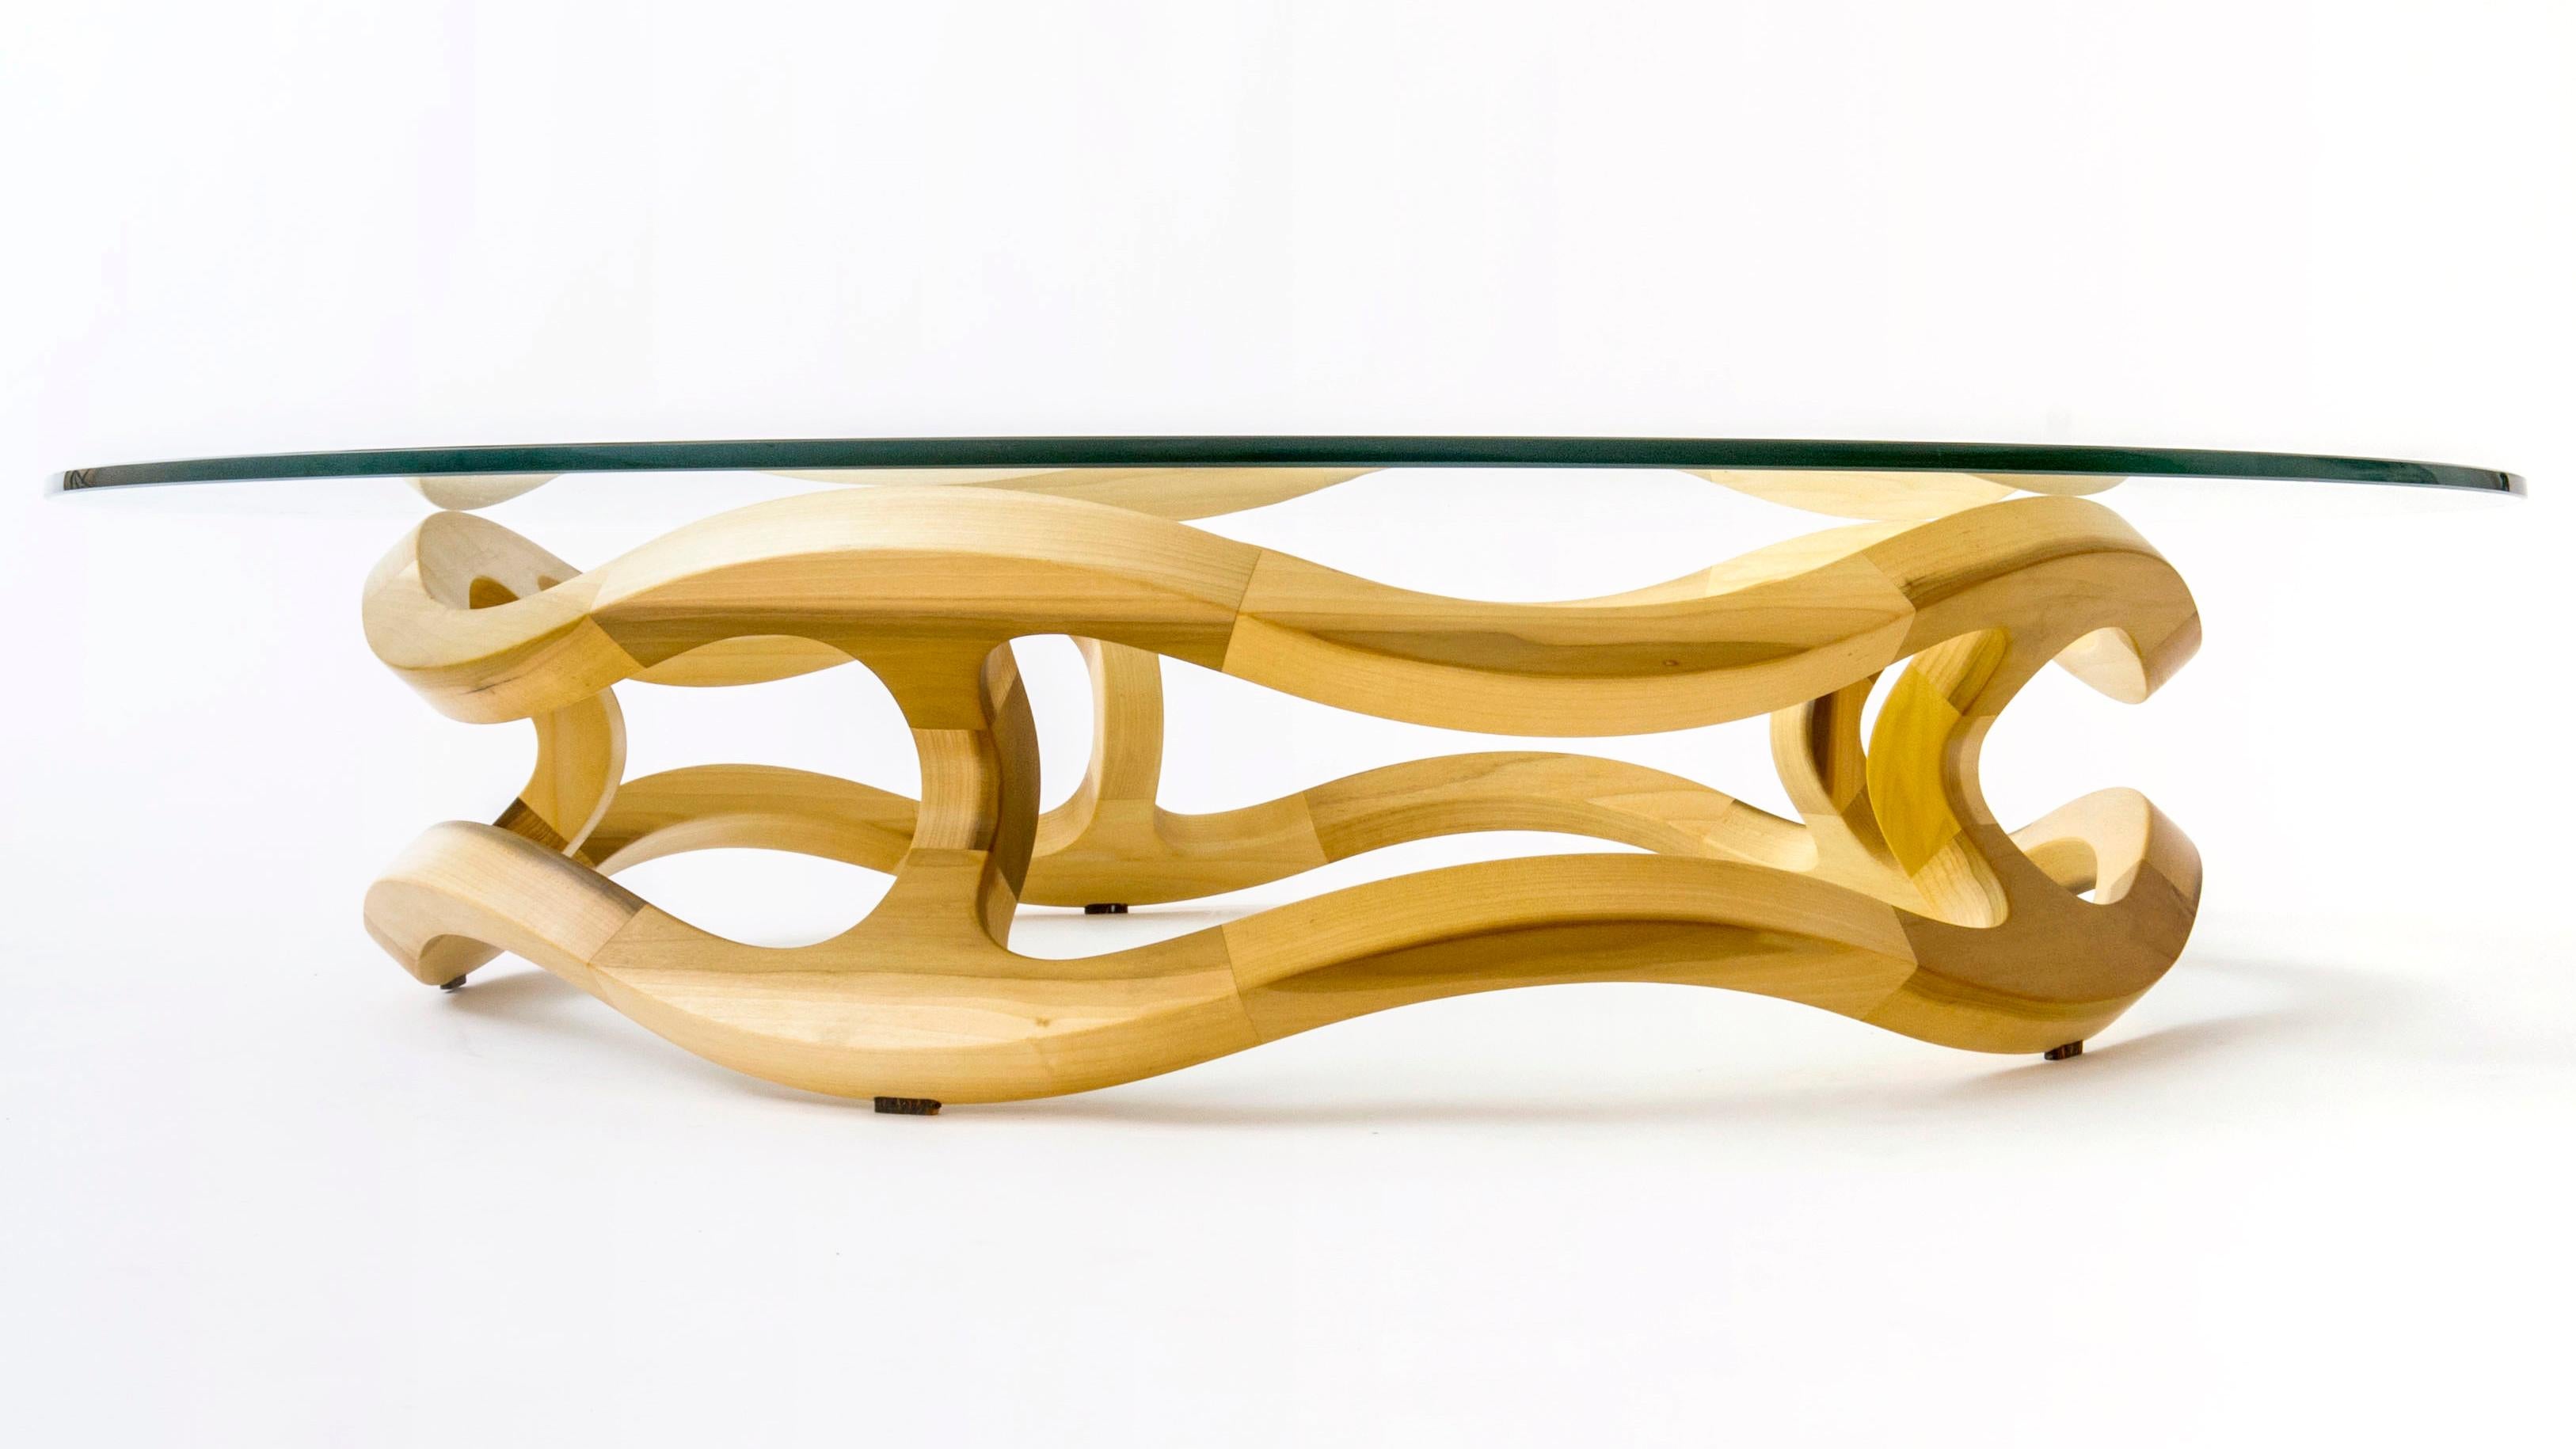 Contemporary Flamenca, Geometric Sculptural Center Table Made of Solid Wood by Pedro Cerisola For Sale